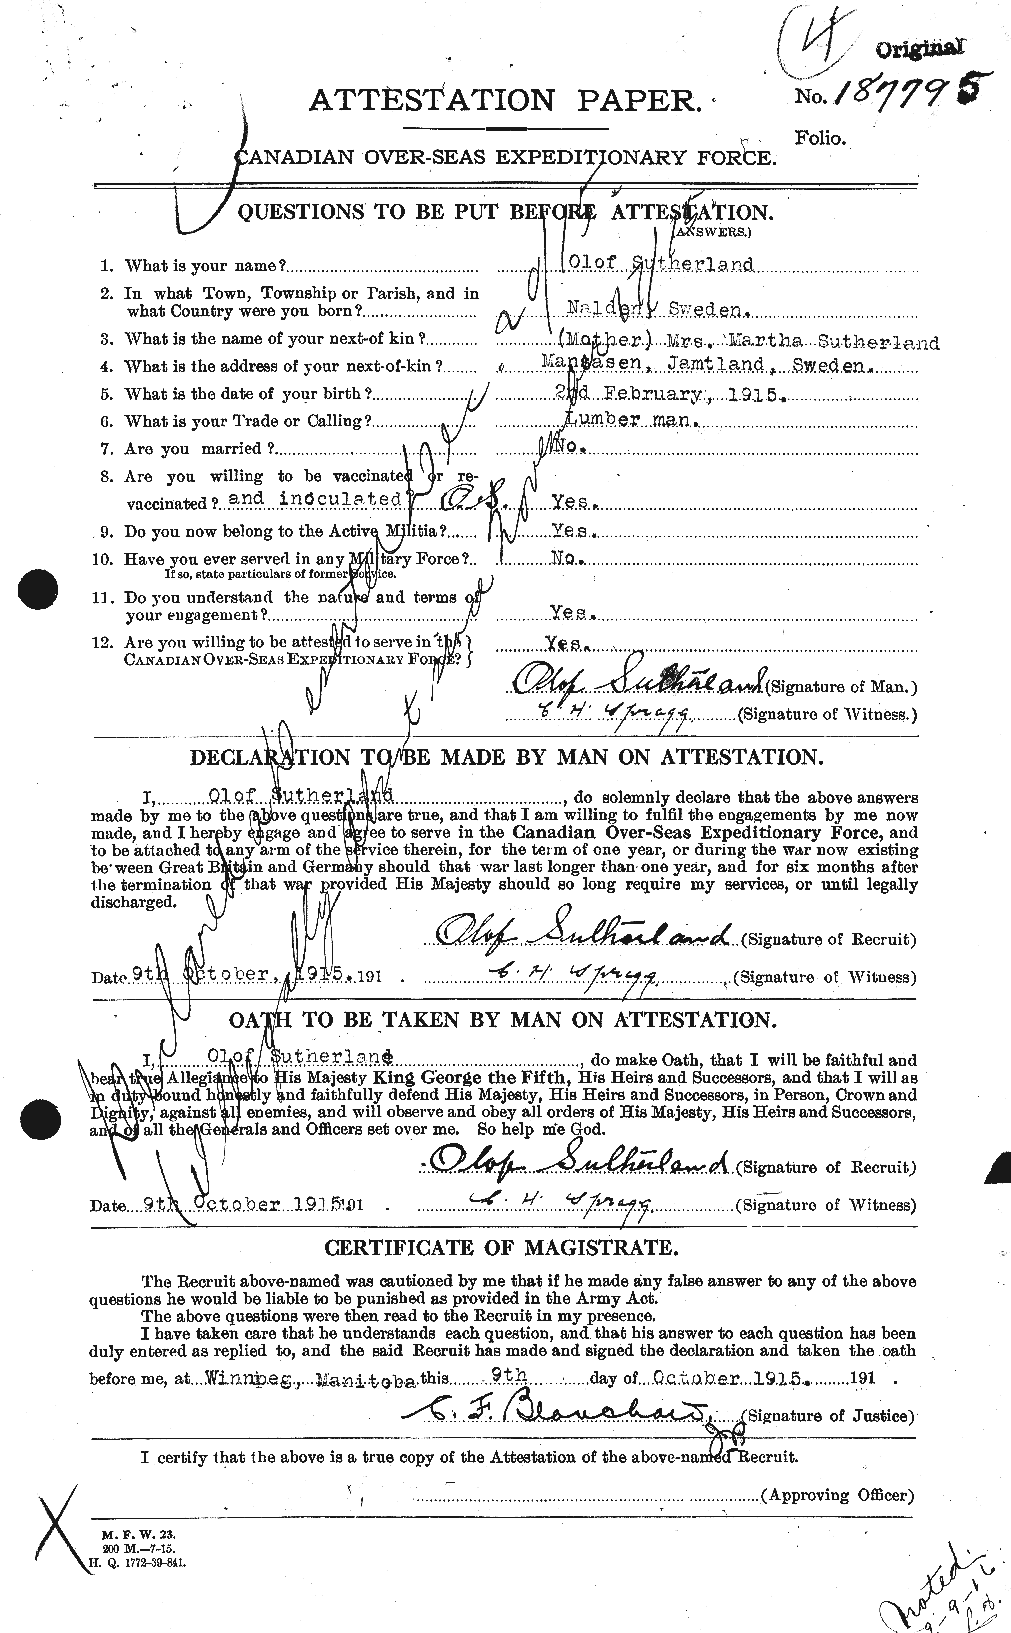 Personnel Records of the First World War - CEF 126830a